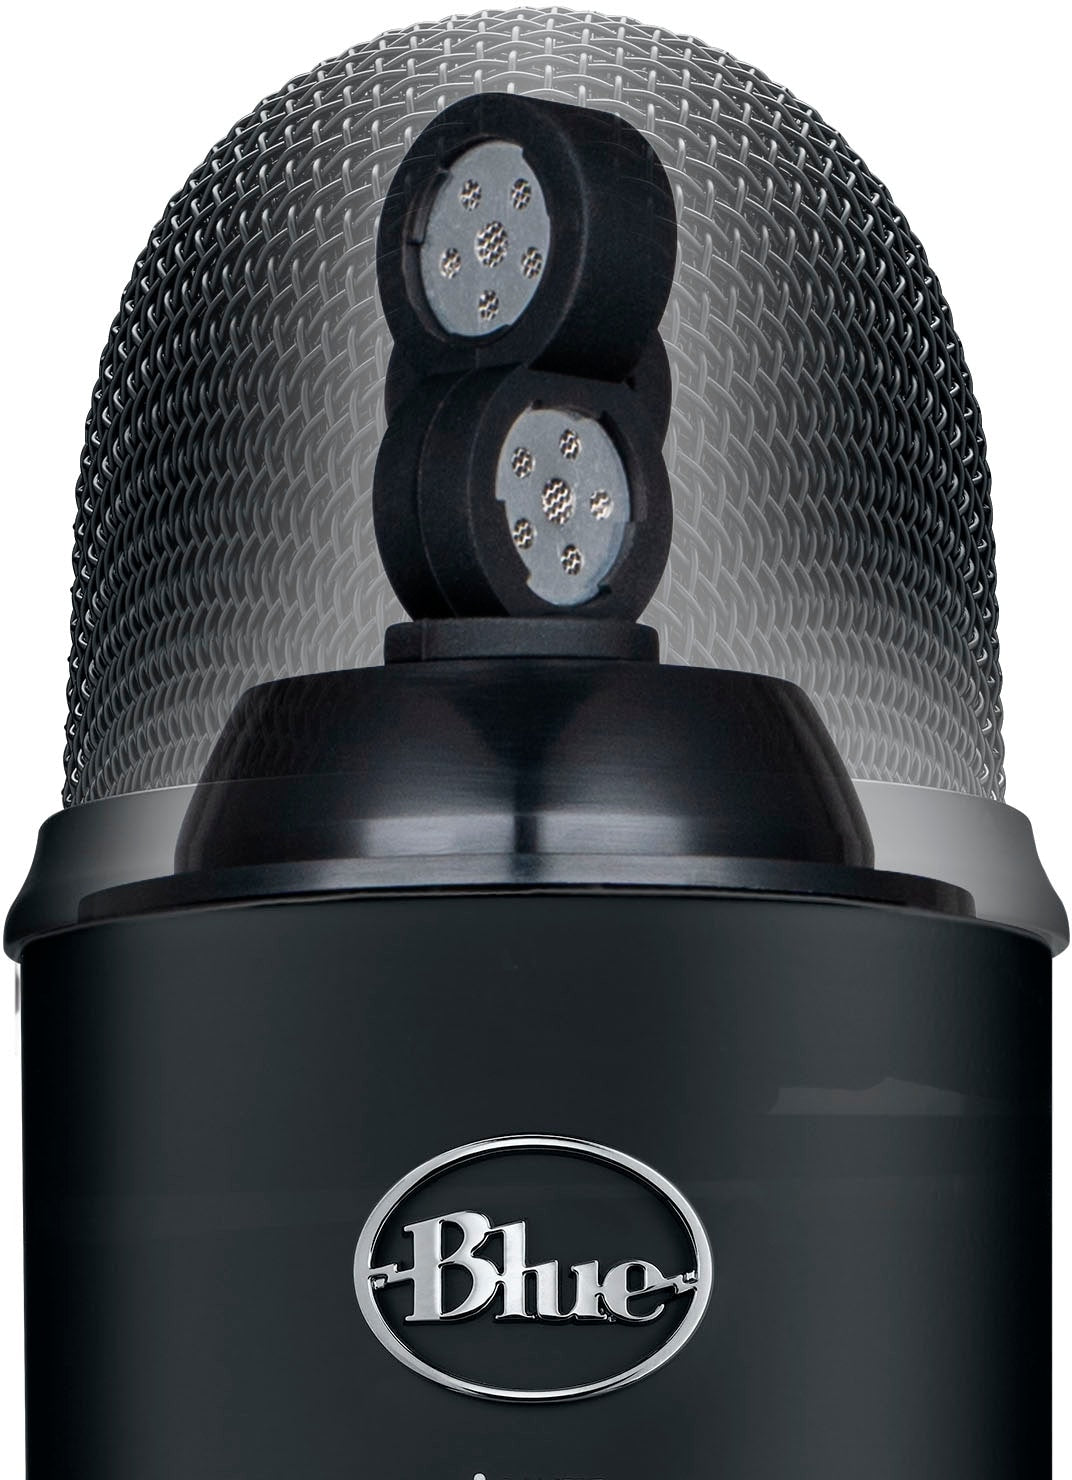 Logitech - Blue Yeti Game Streaming USB Condenser Microphone Kit with Blue VO!CE, Exclusive Streamlabs Themes, Custom Pop Filter_2